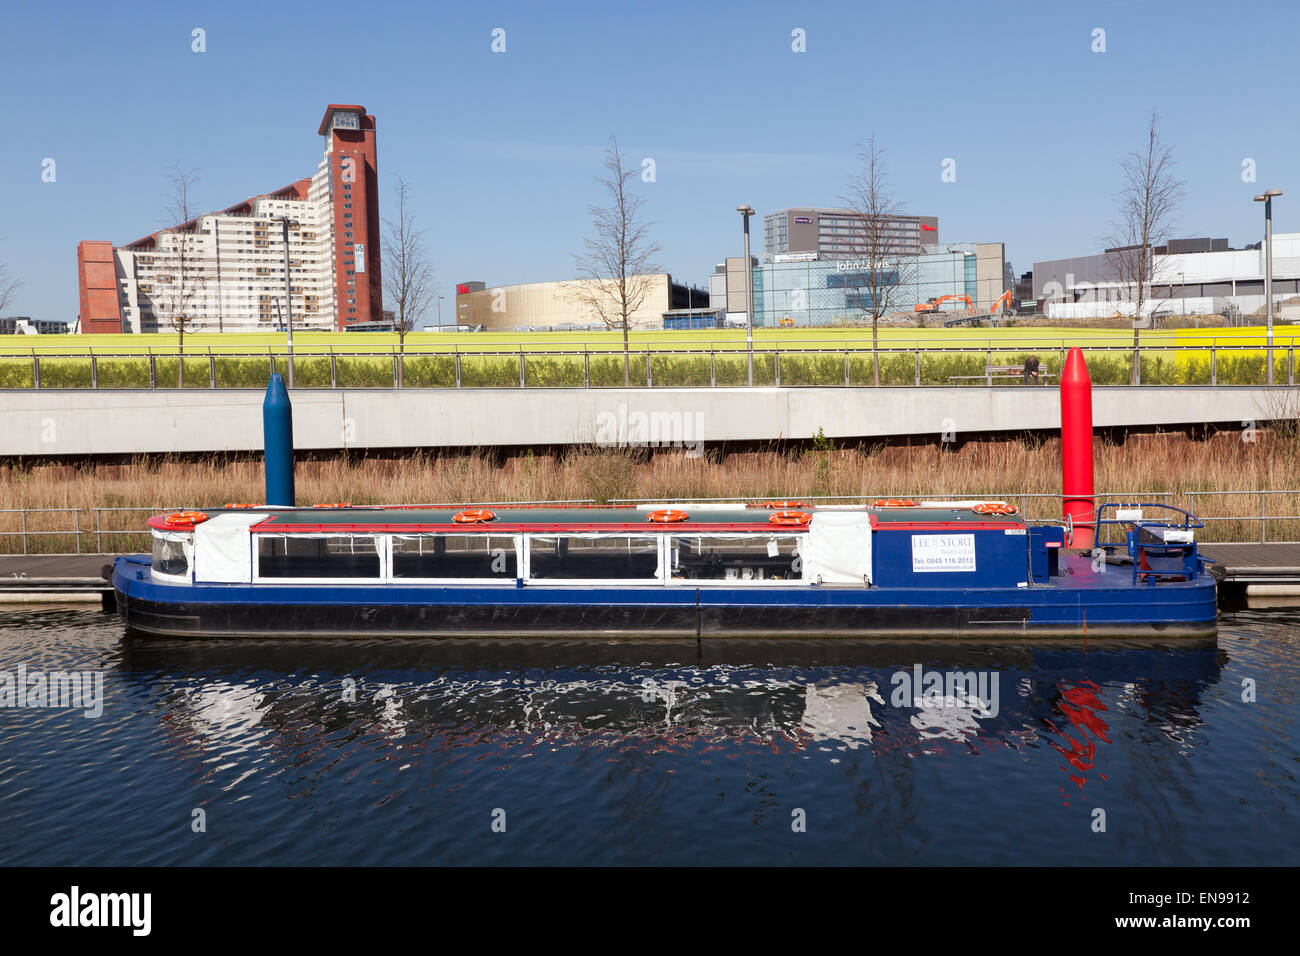 Queen Elizabeth Olympic Park Boat Tours, offered by the Lee and Stort Boat Company, on the river Lee Stock Photo